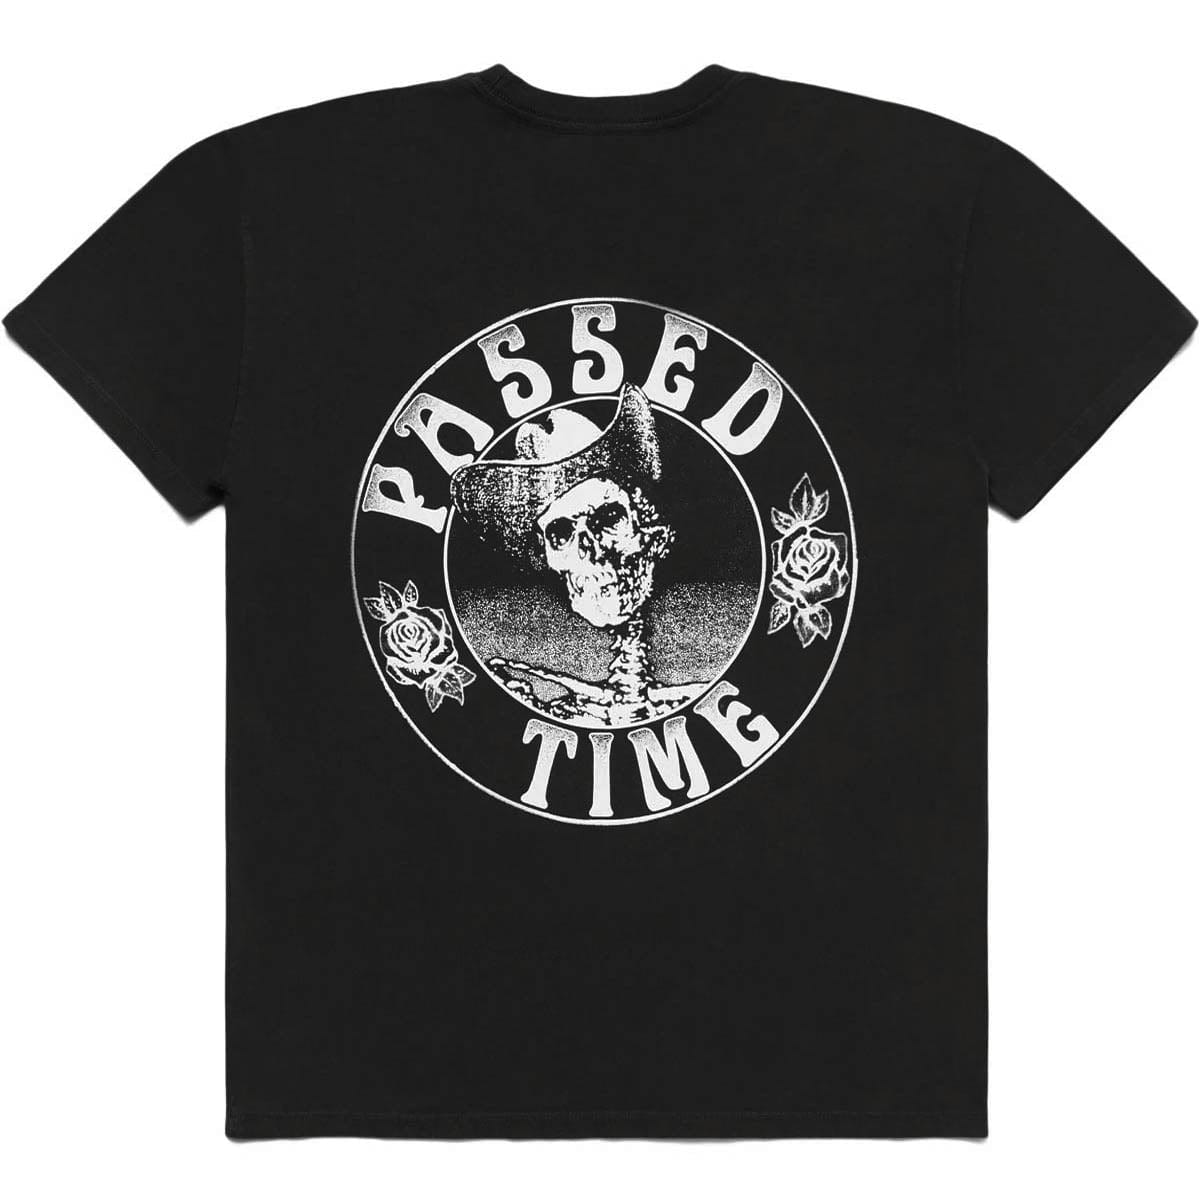 One Of These Days T-Shirts PASSED TIME TEE